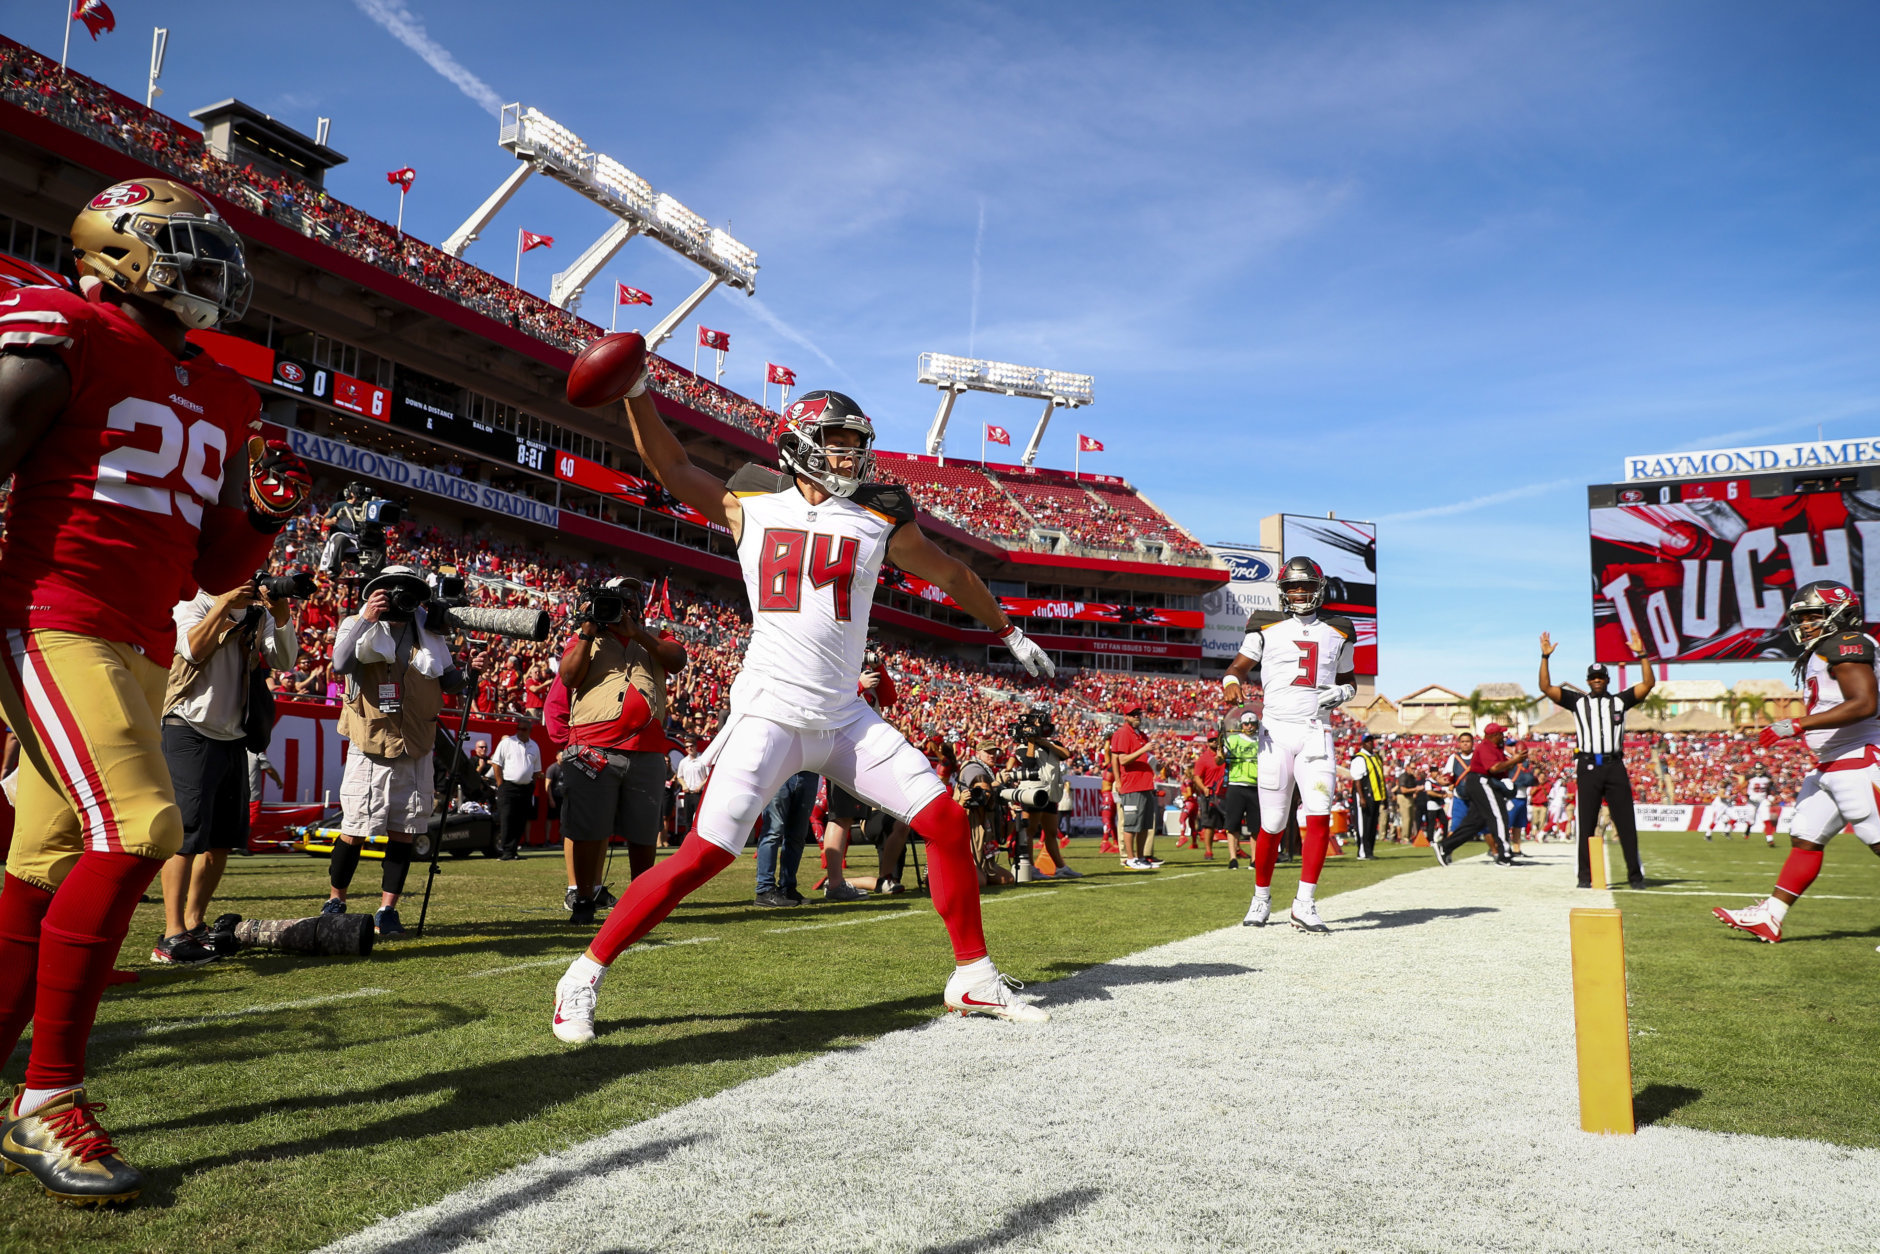 TAMPA, FL - NOVEMBER 25: Tight end Cameron Brate #84 of the Tampa Bay Buccaneers celebrates his touchdown in the first quarter of the game against the San Francisco 49ers at Raymond James Stadium on November 25, 2018 in Tampa, Florida. (Photo by Will Vragovic/Getty Images)